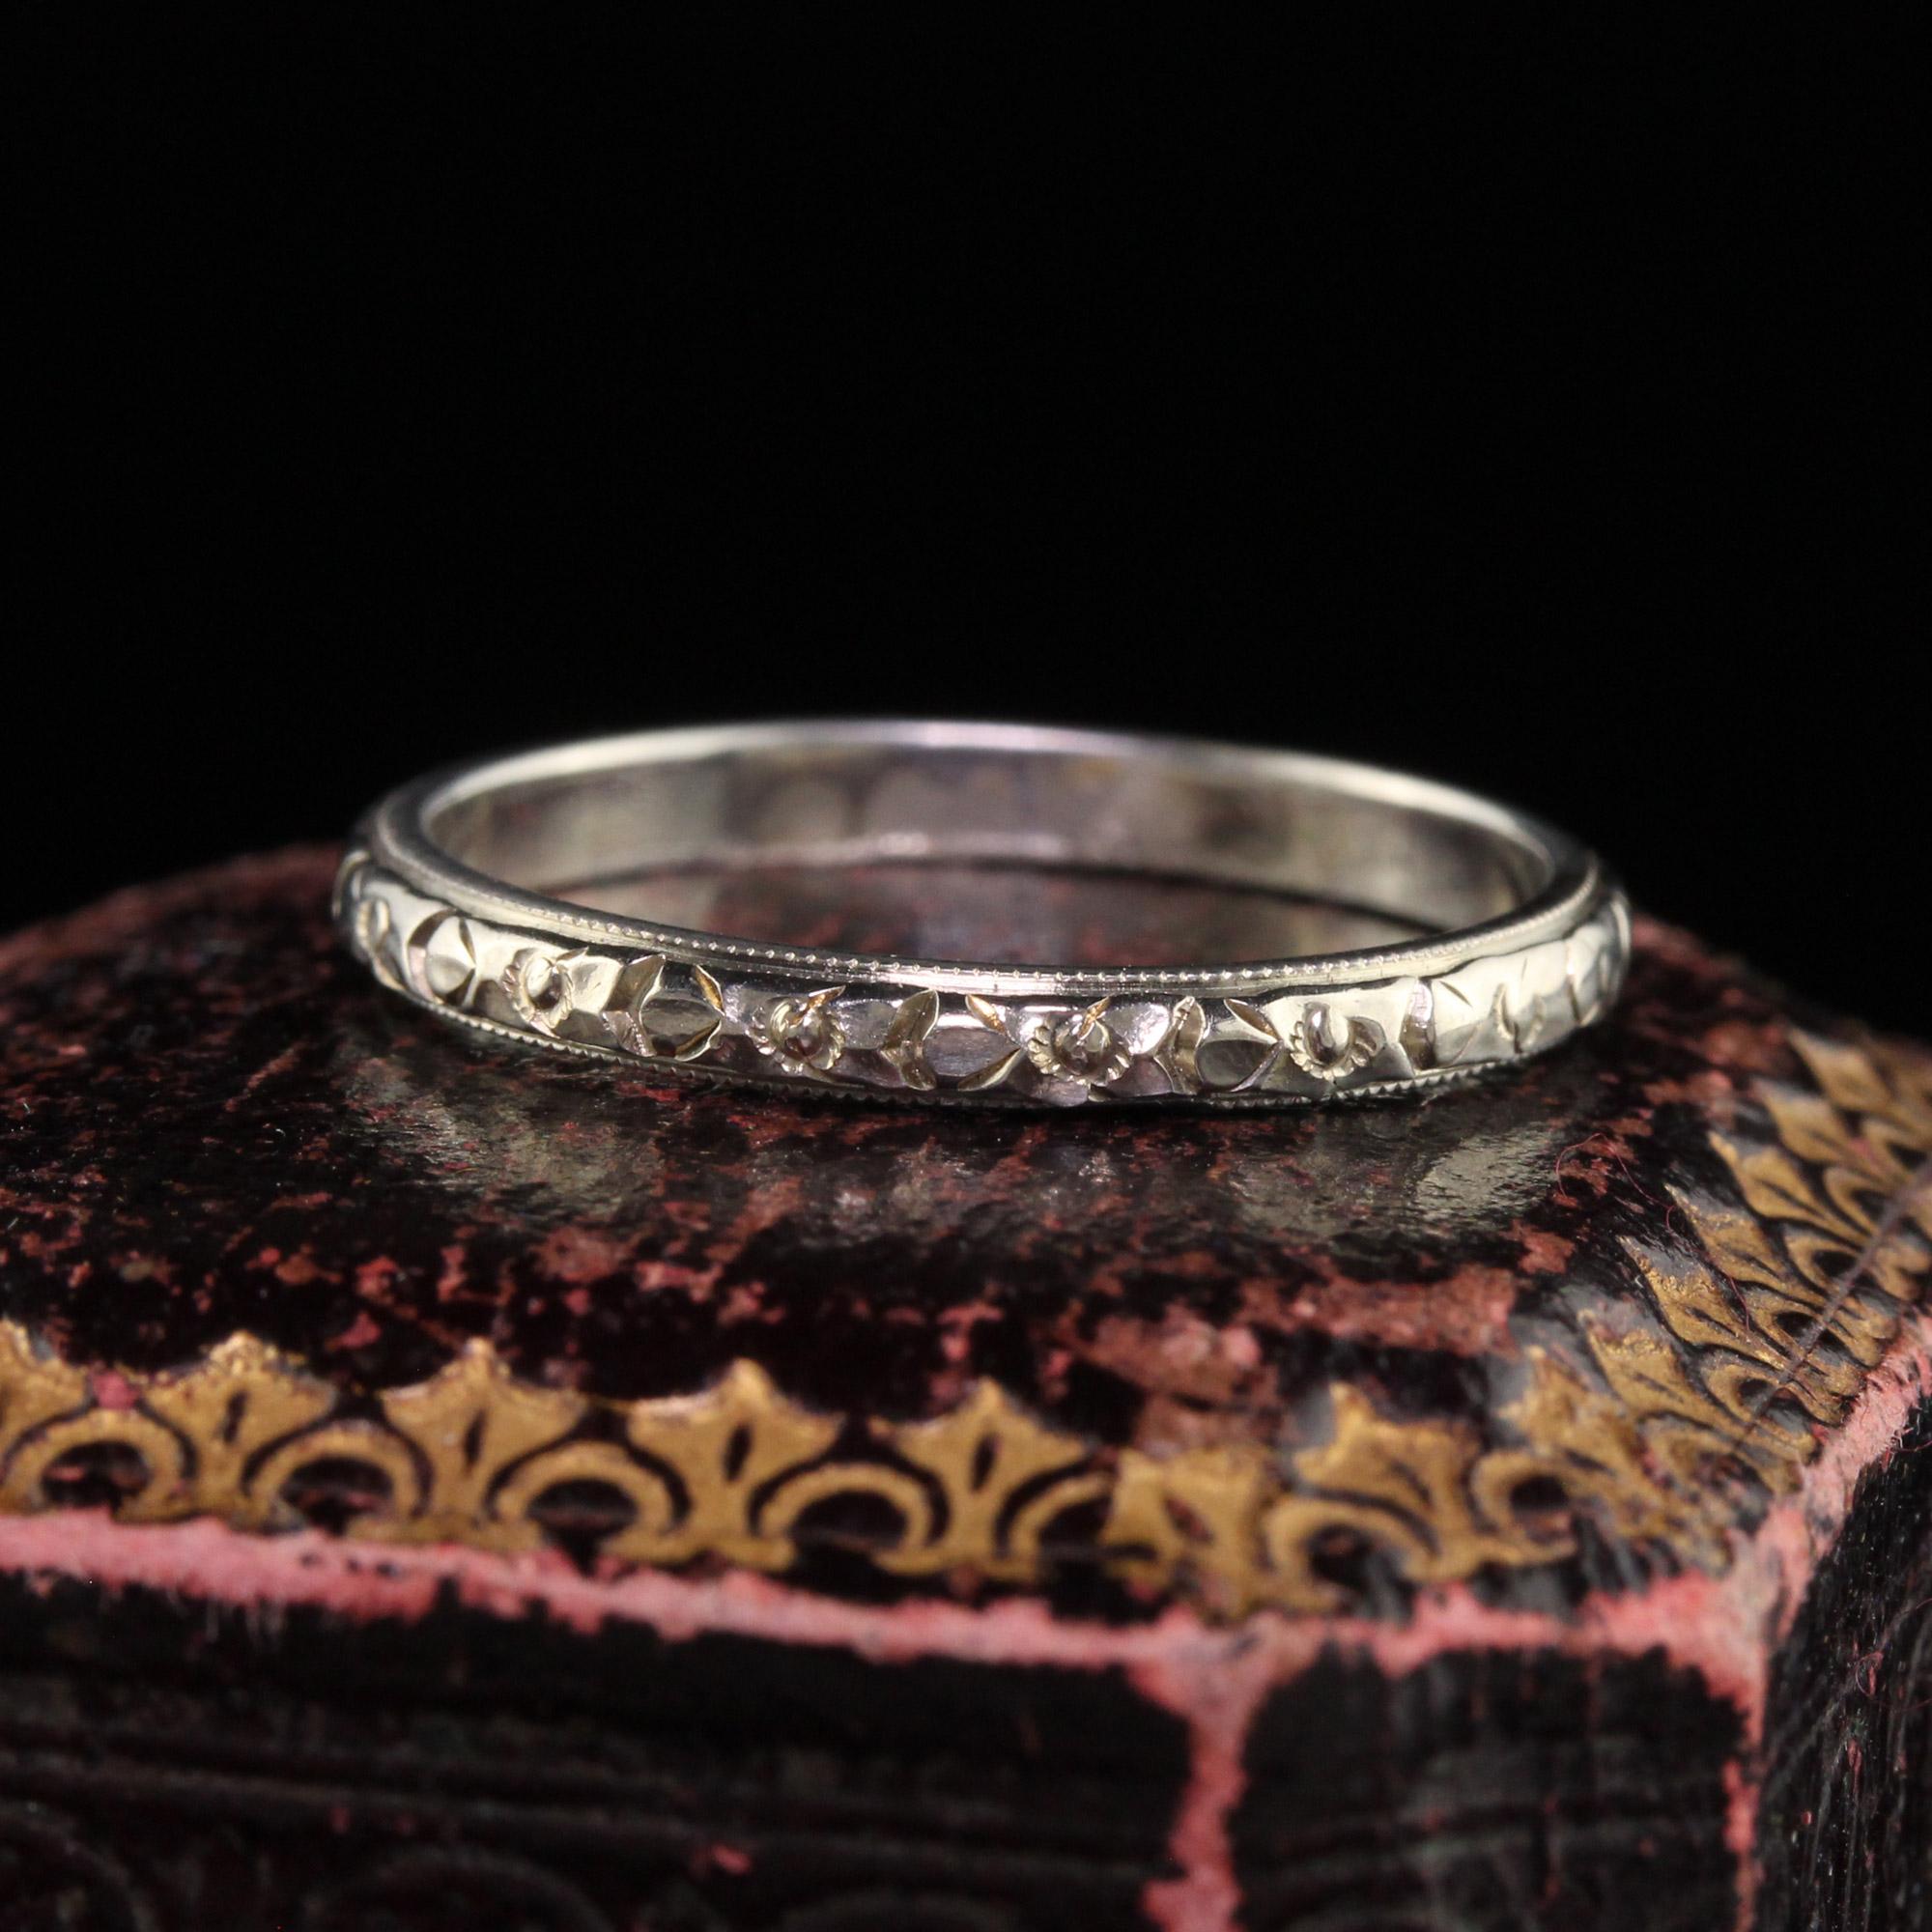 Beautiful Antique Art Deco Belais 18K White Gold Engraved Wedding Band - Size 6 1/2. This beautiful wedding band is crafted in 18k white gold. There are engravings going around the entire ring and it is in great condition. The ring can be stacked